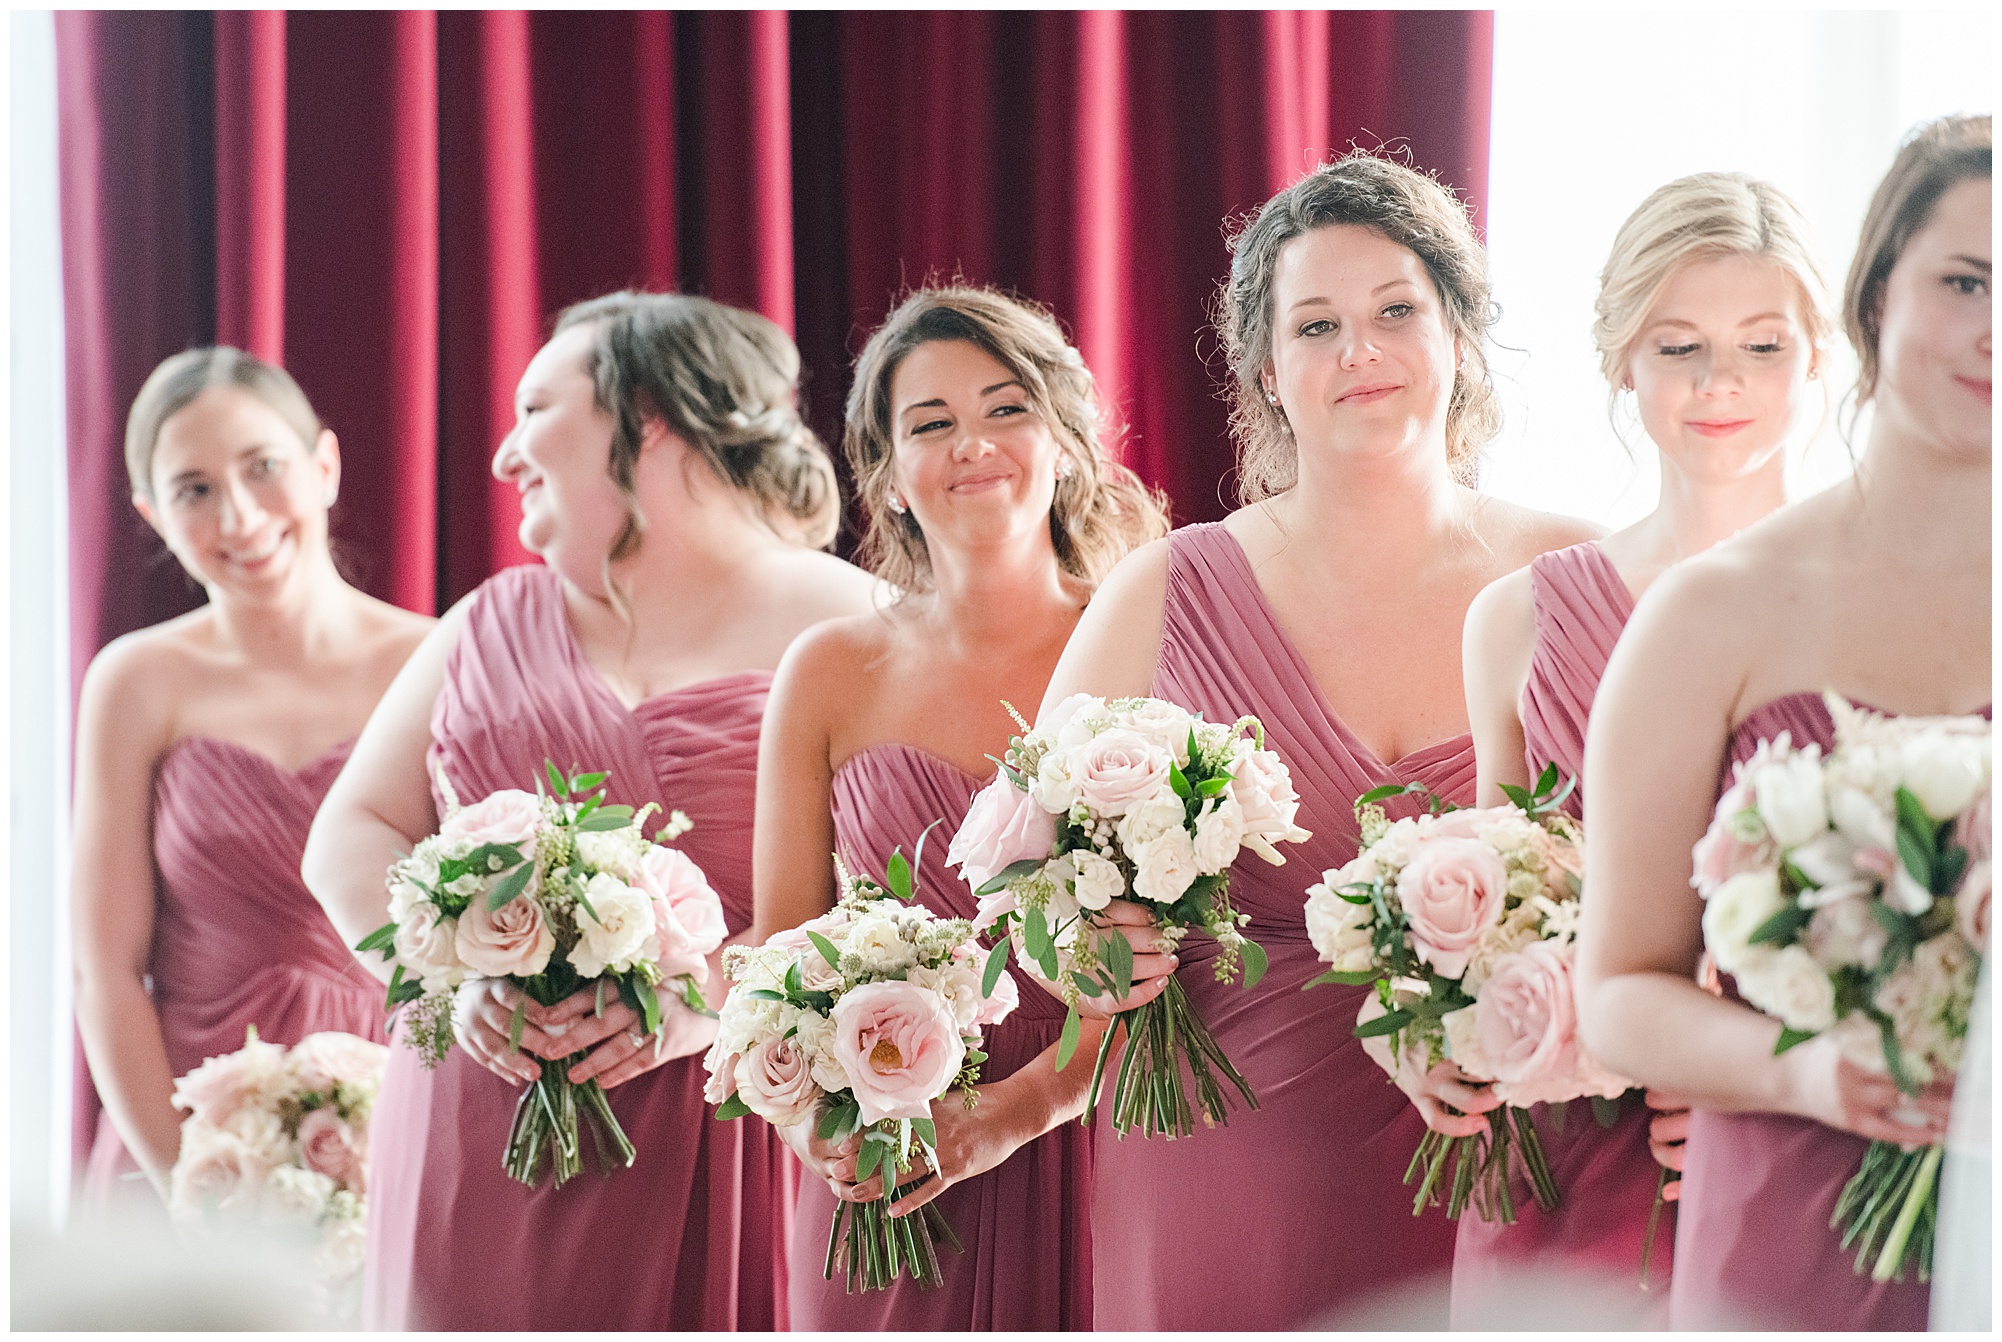 wedding ceremony in the ballroom at dover hall. bridesmaids watching bride walking down the aisle. by richmond rva wedding photographer, sarah & dave photography.